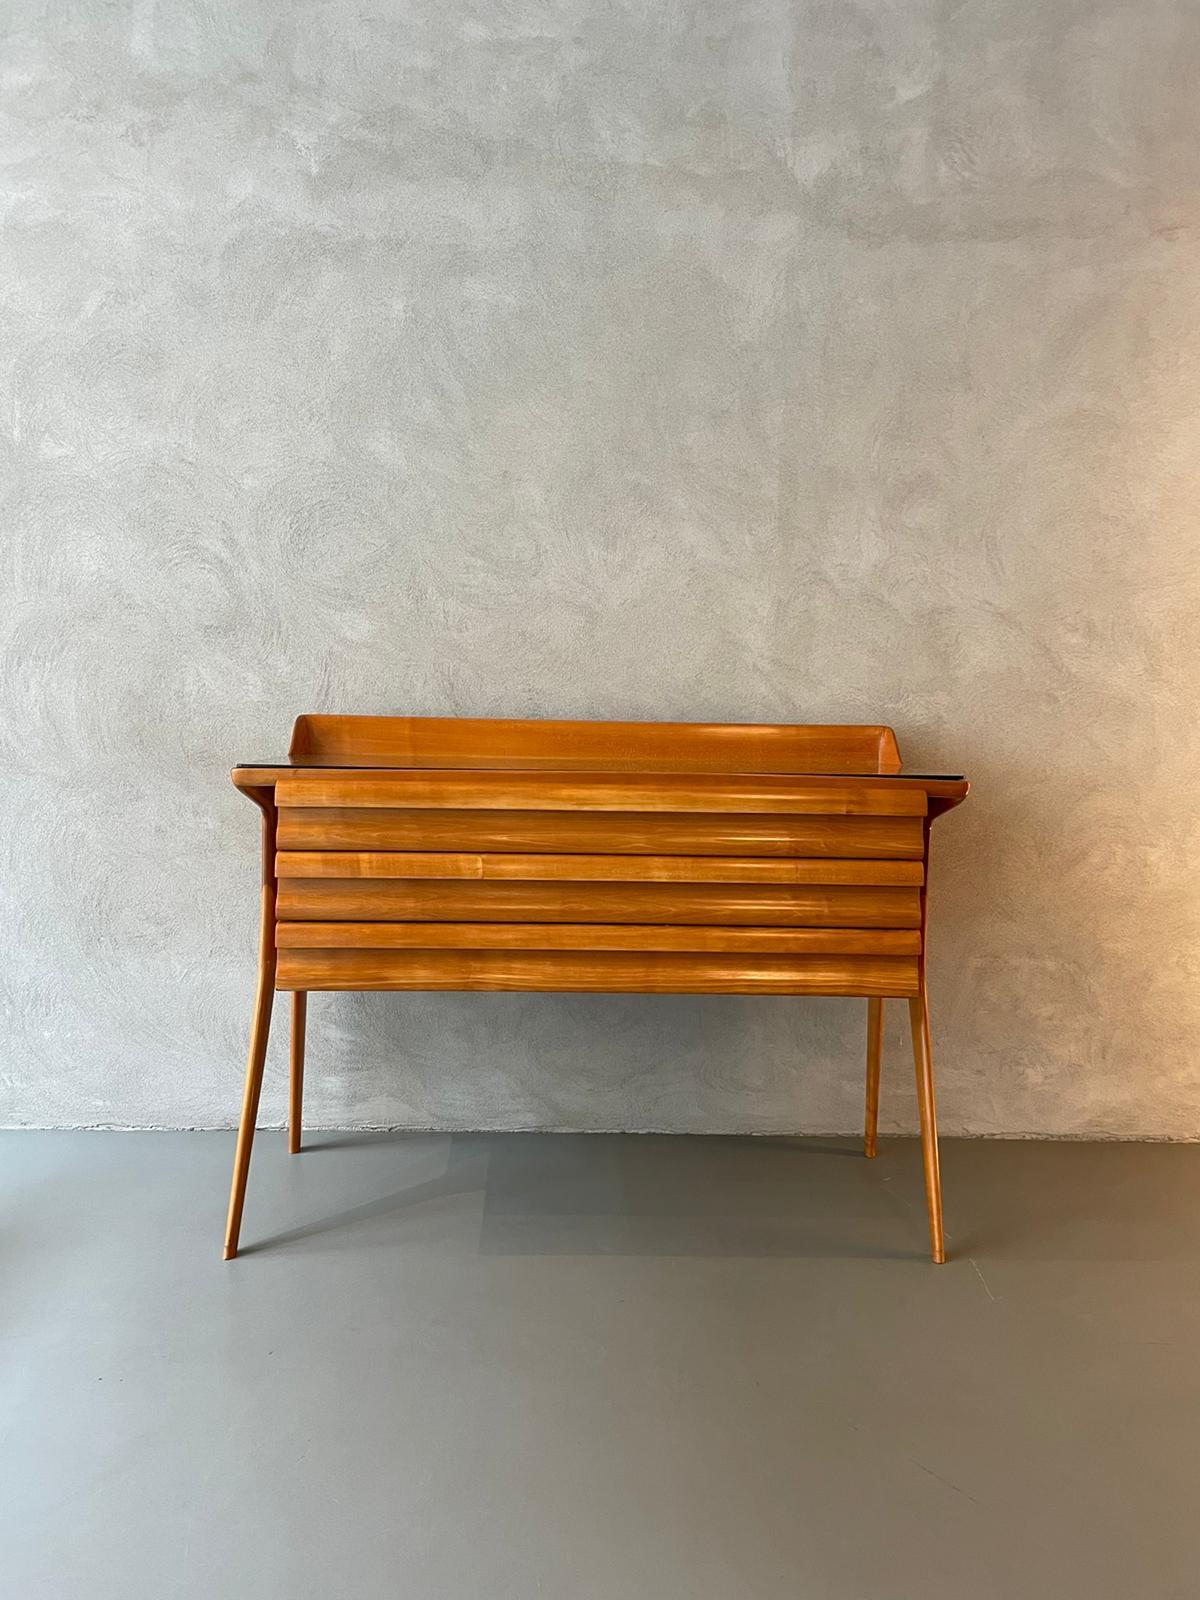 Cupboard designed by Vittorio Dassi and manufactured in Italy, 1950s.
Chest of drawers in ash with the typical shape of Vittorio dassi's drawings, with a sinuous base, composed of two feet on each side.
There are three drawers above which there is